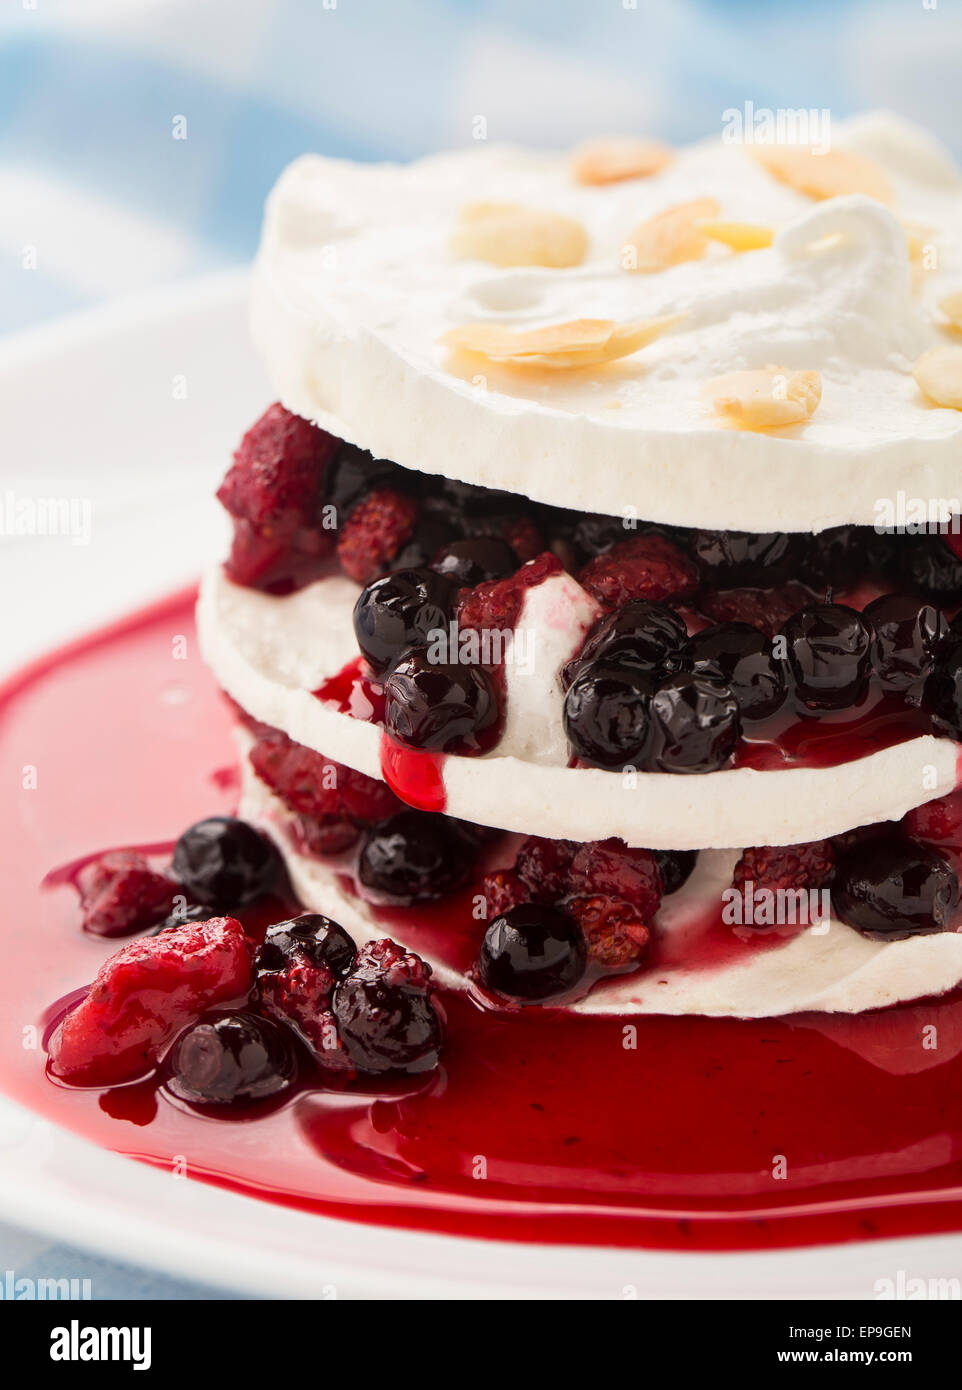 Sweet delicious dessert - meringue with berry layers Stock Photo